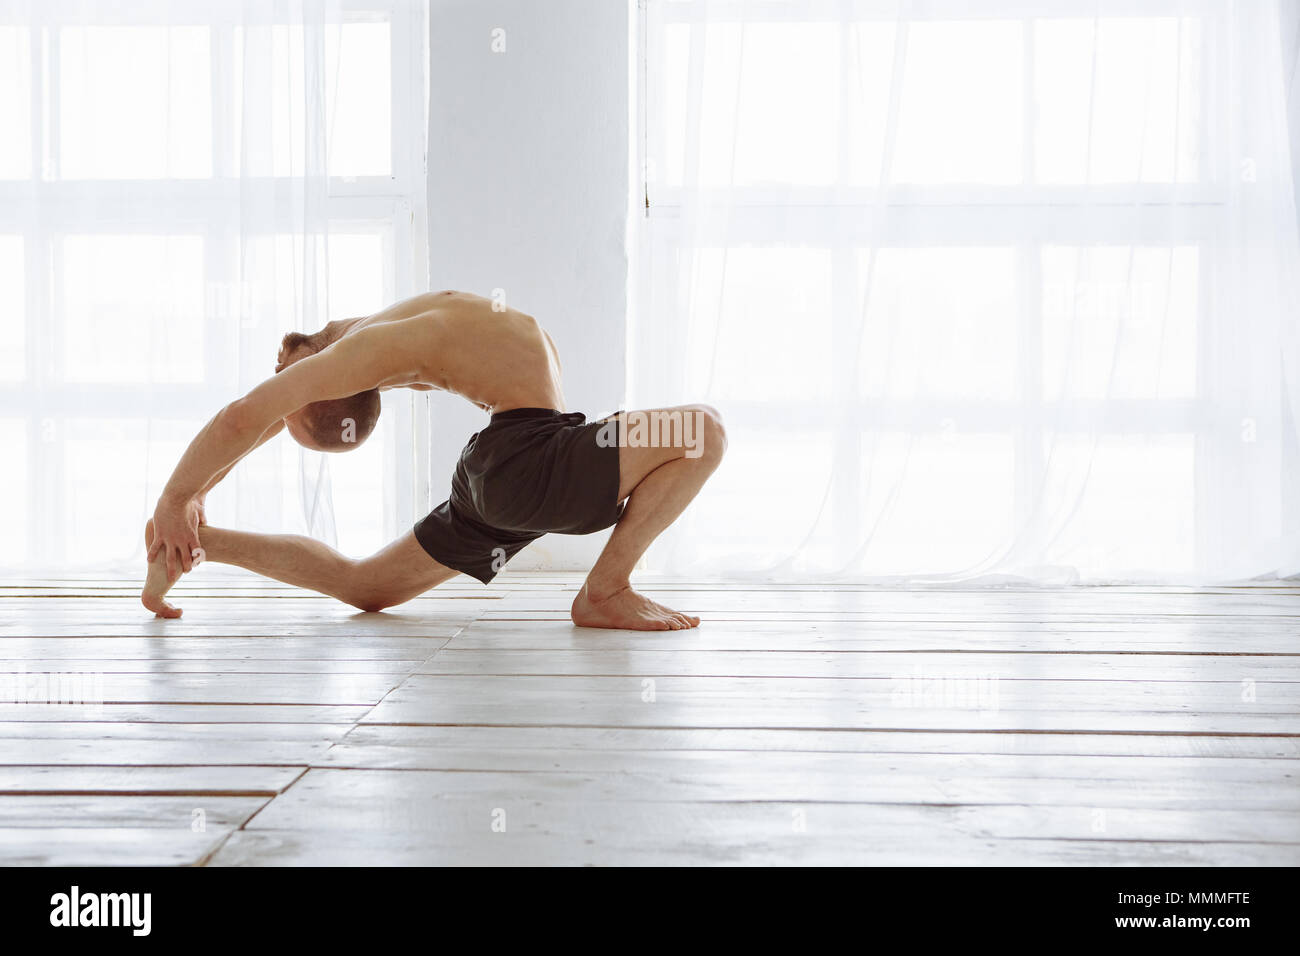 Fit muscular flexible man posing in difficult yoga pose Stock Photo